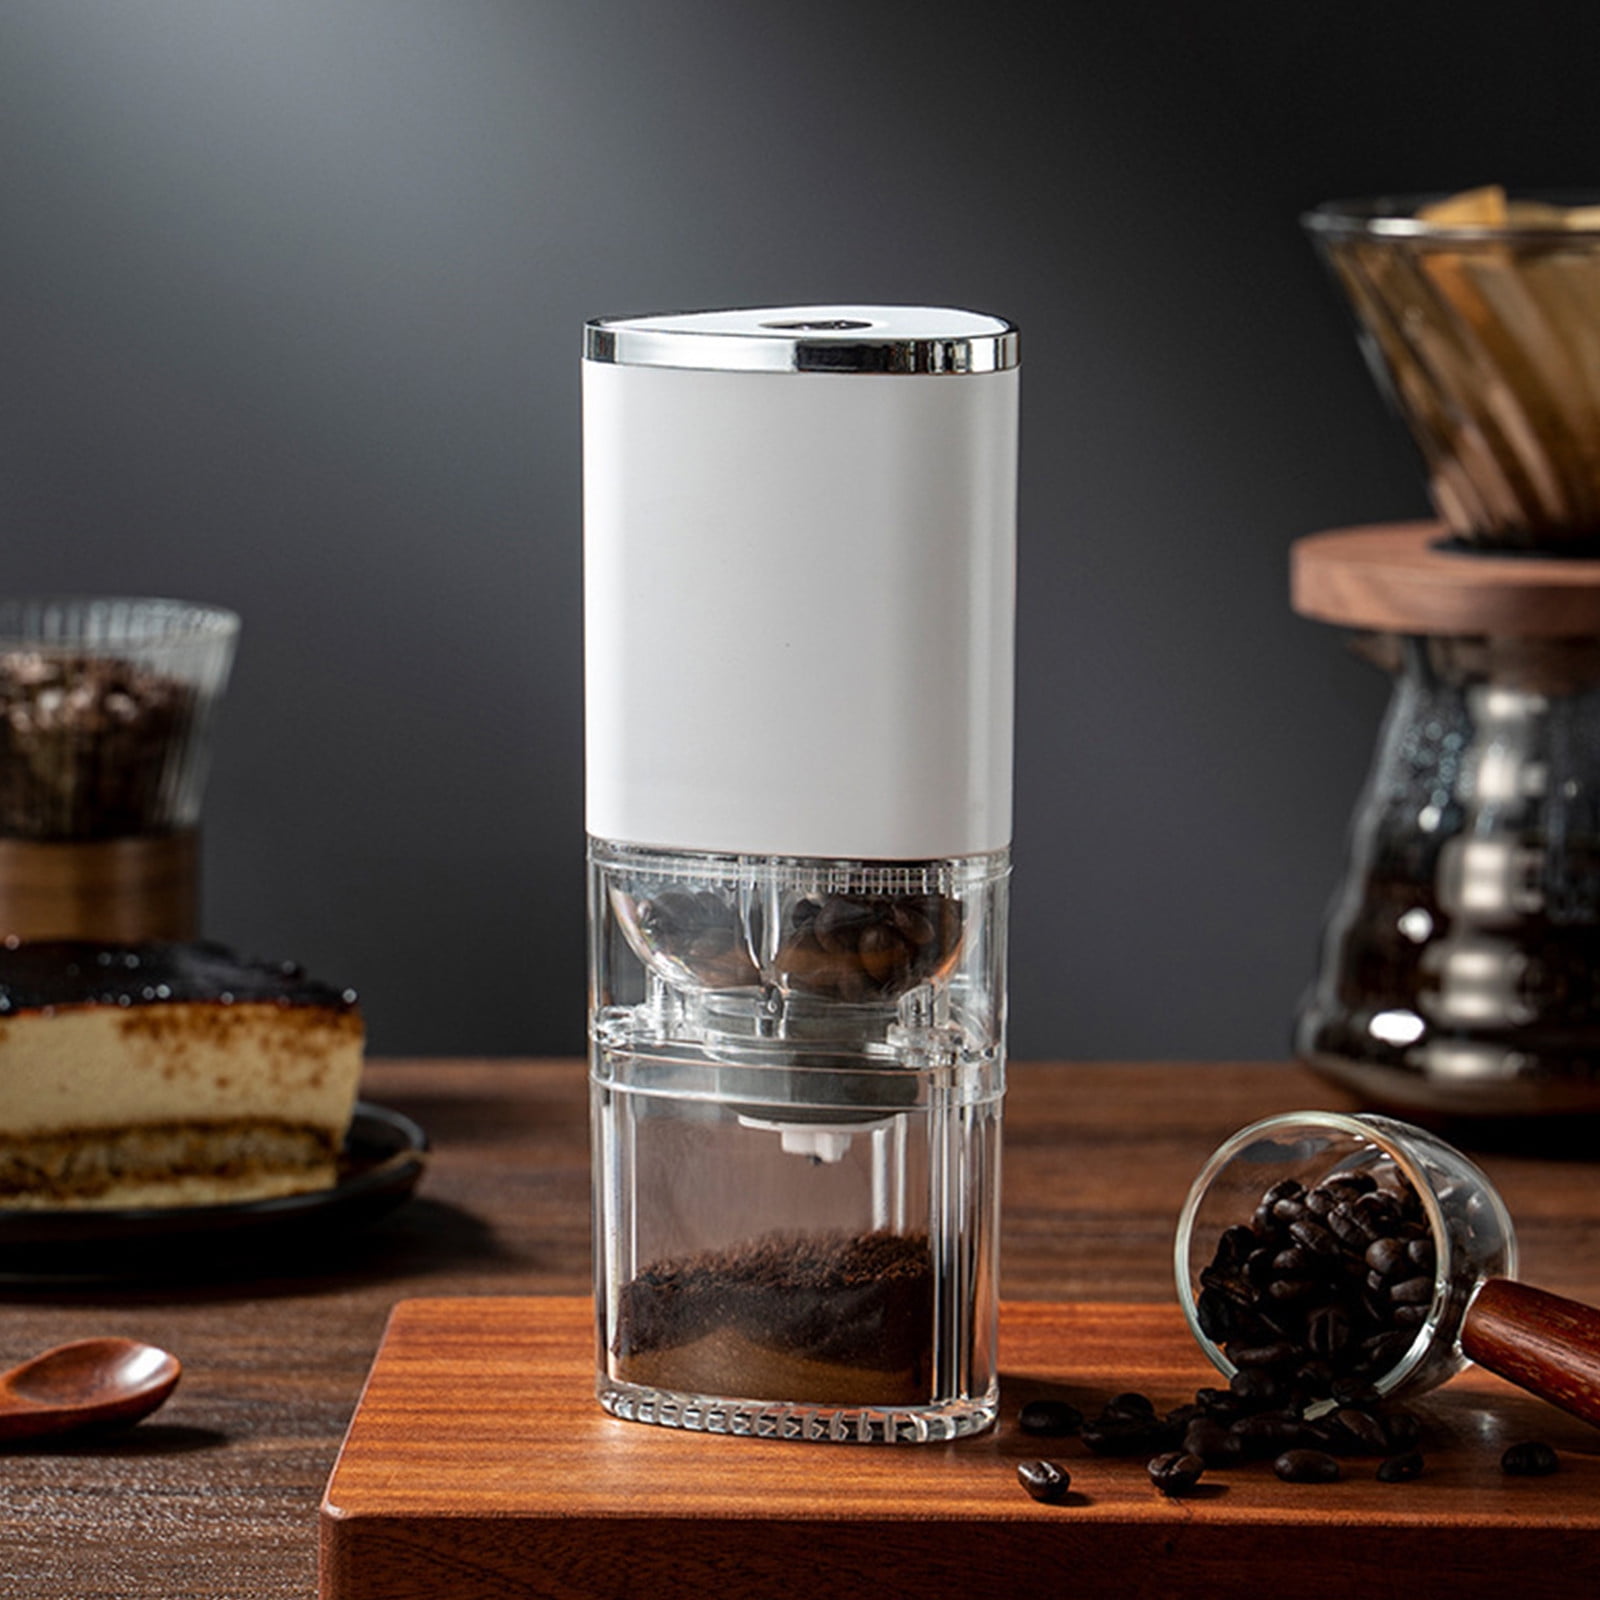 1pc White Portable Coffee Grinder With Ceramic Core, Type-c Usb Charging,  Professional Electric Coffee Bean Grinder